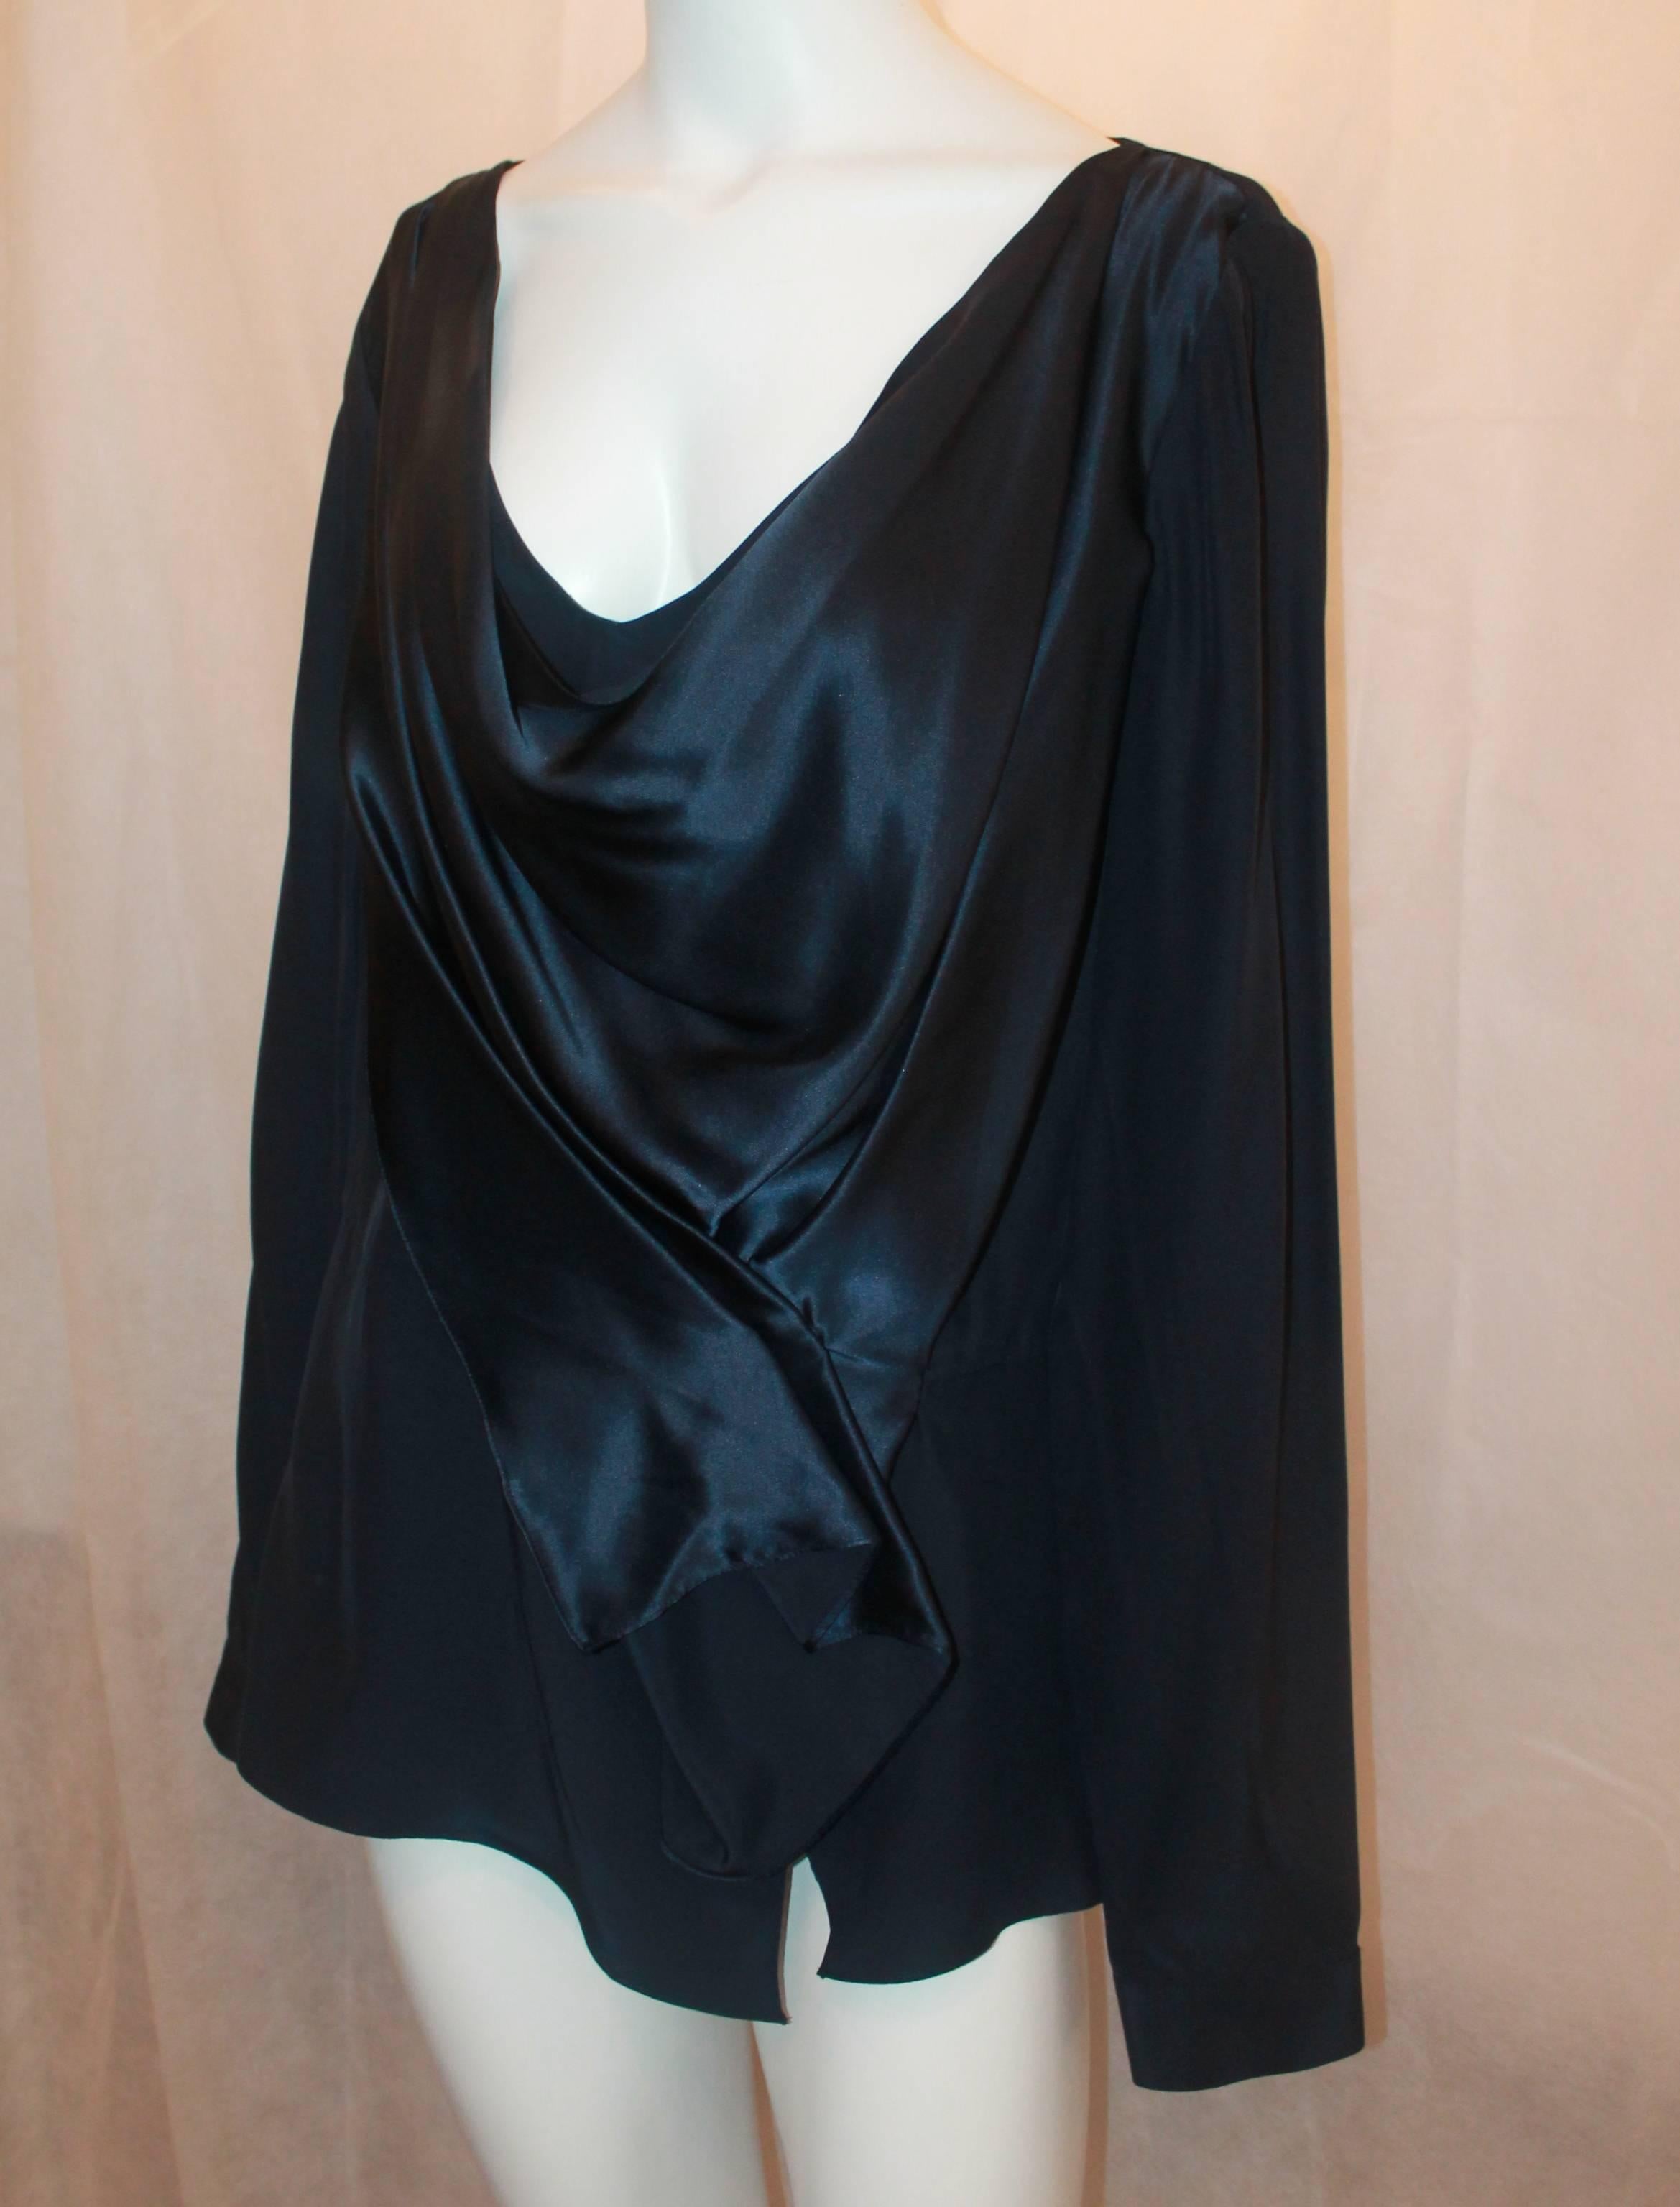 Oscar de la Renta Navy Silk Long Sleeve Blouse - 16. This piece is in excellent condition and is a staple piece. It has one slight pull on the back towards the top. It features a cowl neckline with a flowing front gathering.

Measurements:
Bust-